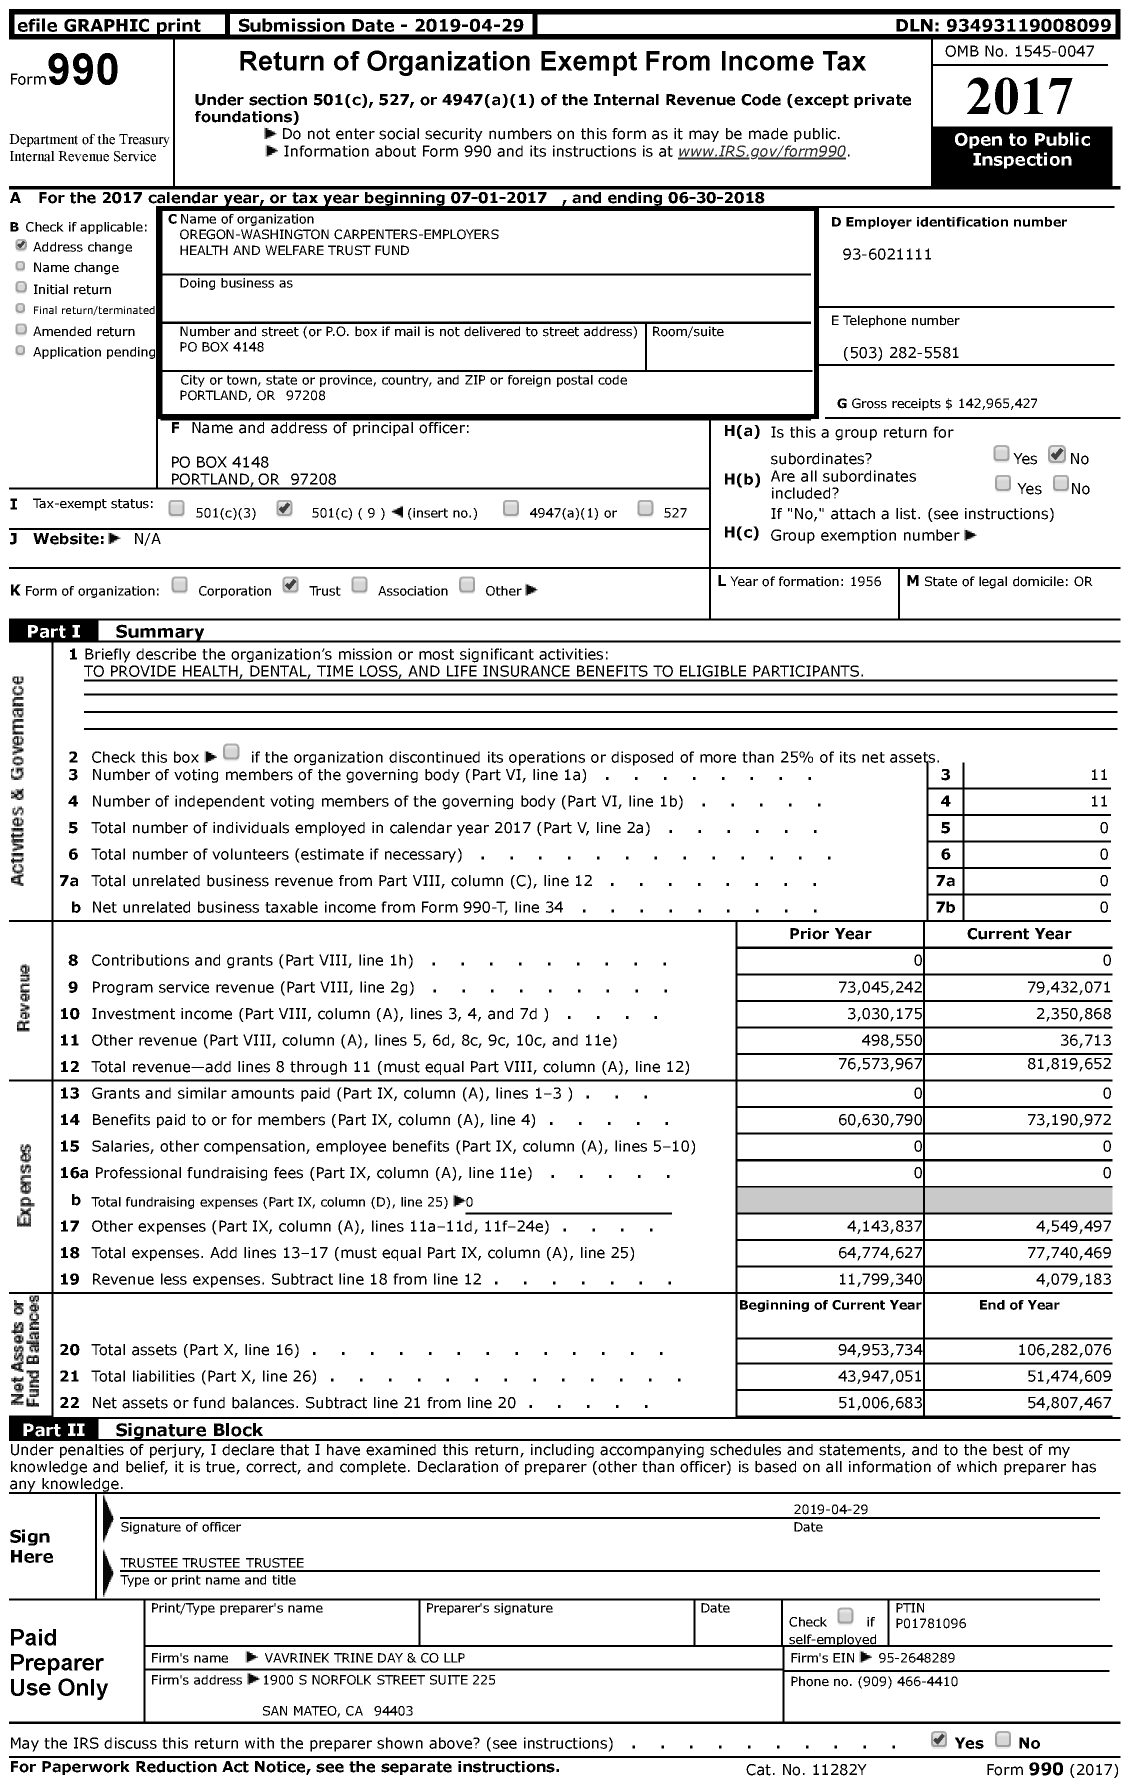 Image of first page of 2017 Form 990 for Oregon-Washington Carpenters-Employers Health and Welfare Trust Fund